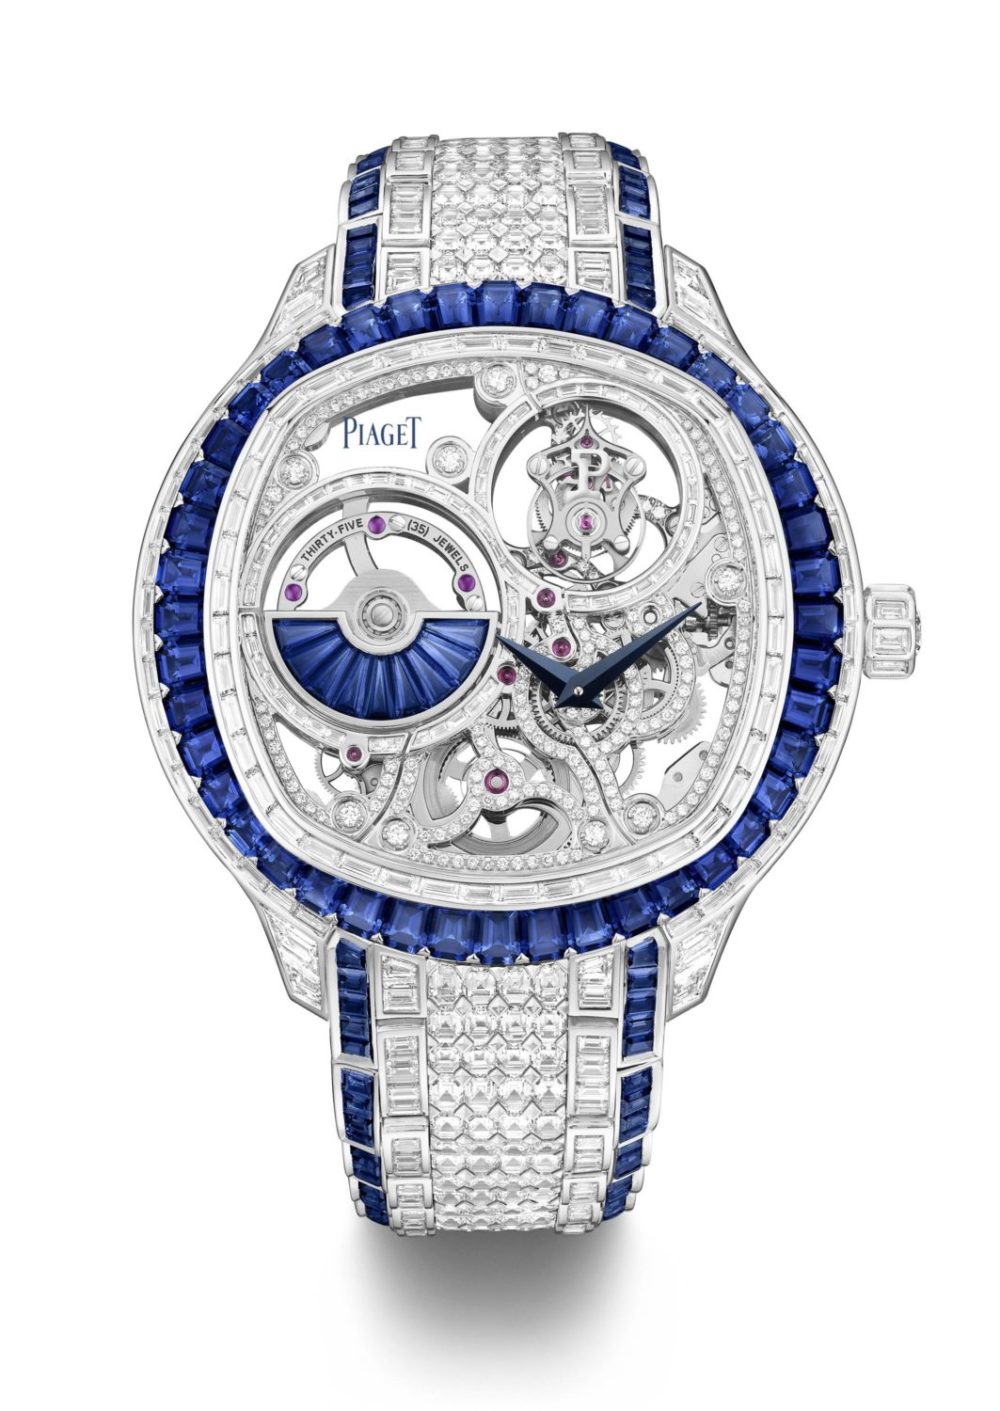 The Piaget Polo exceptional timepieces epitomize daring creativity